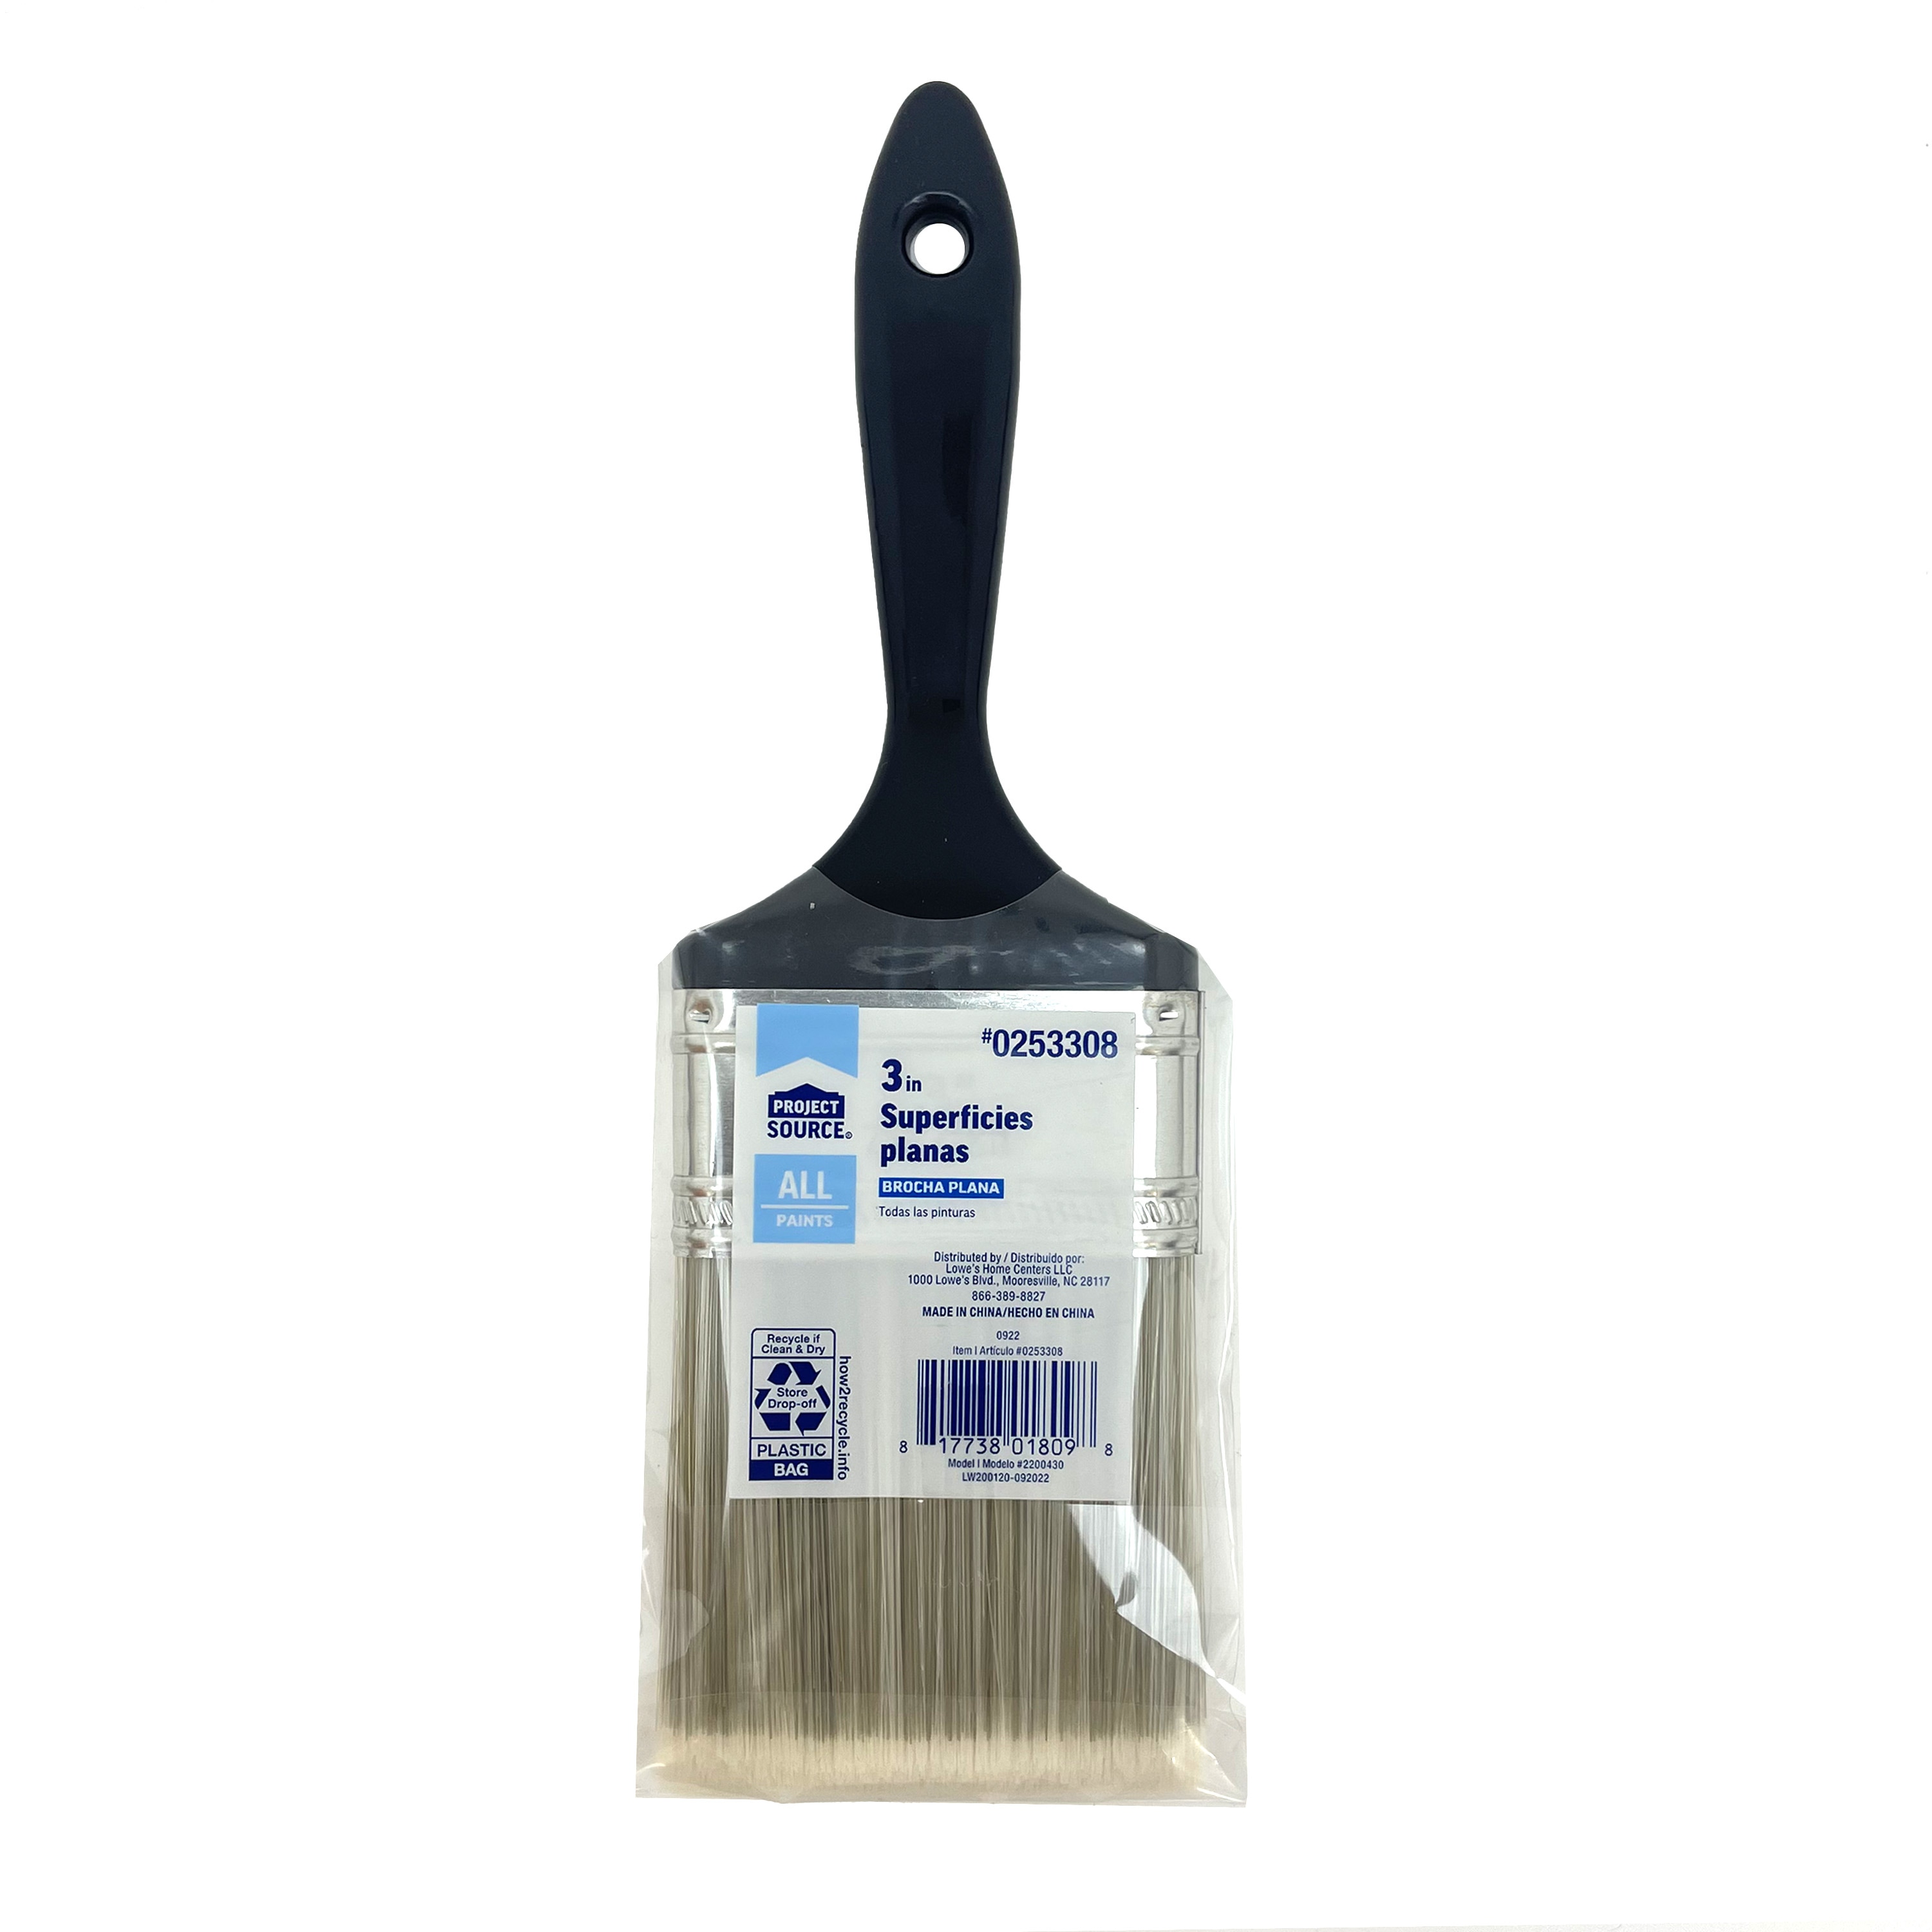 Three Painter's Towels To Help Properly Clean Paint Tools - Trimaco